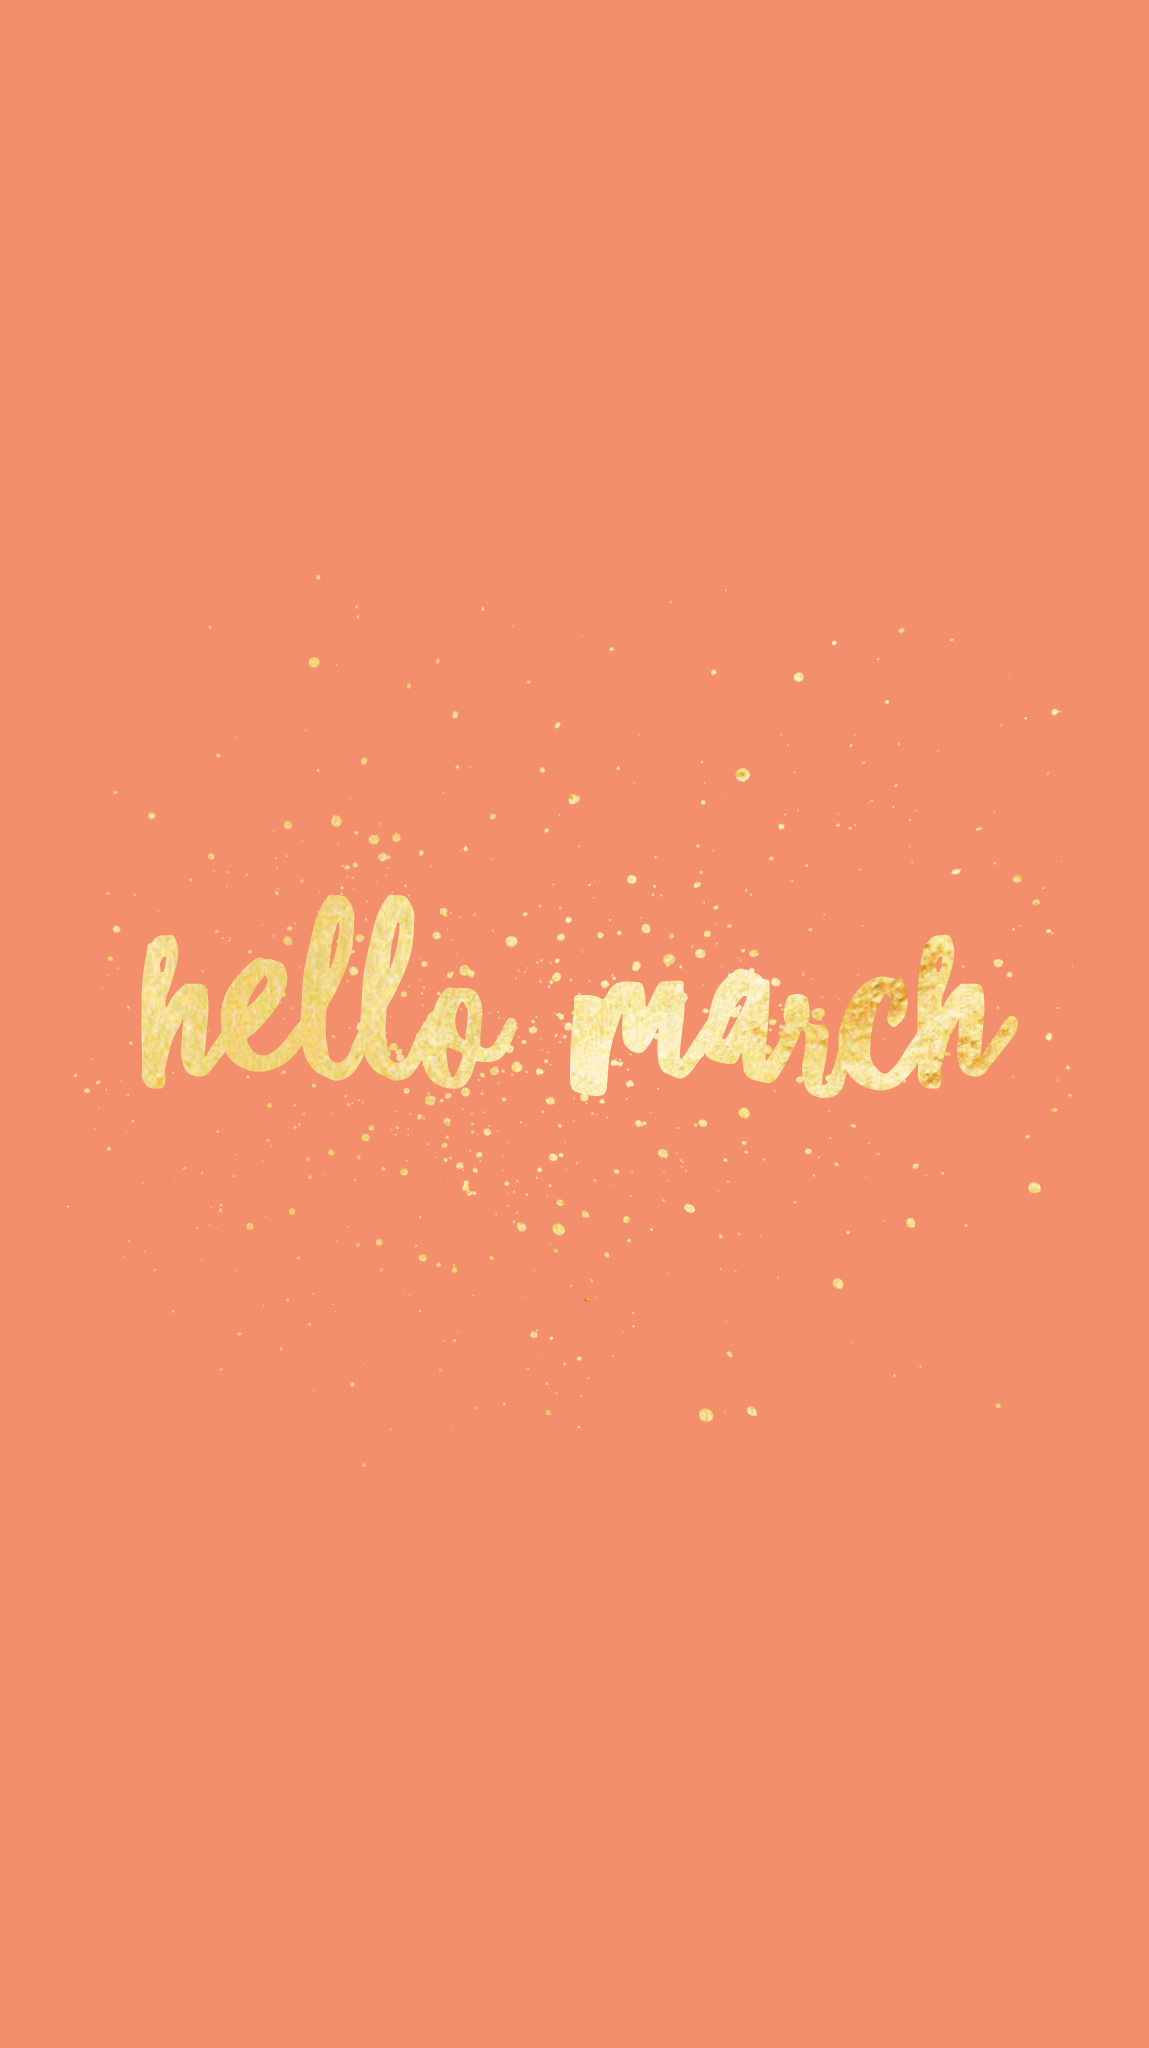 March.. #march #hellomarch #wallpaper #quote #fondos #edit :ʚɤɞ. Hello march, Calendar wallpaper, March background